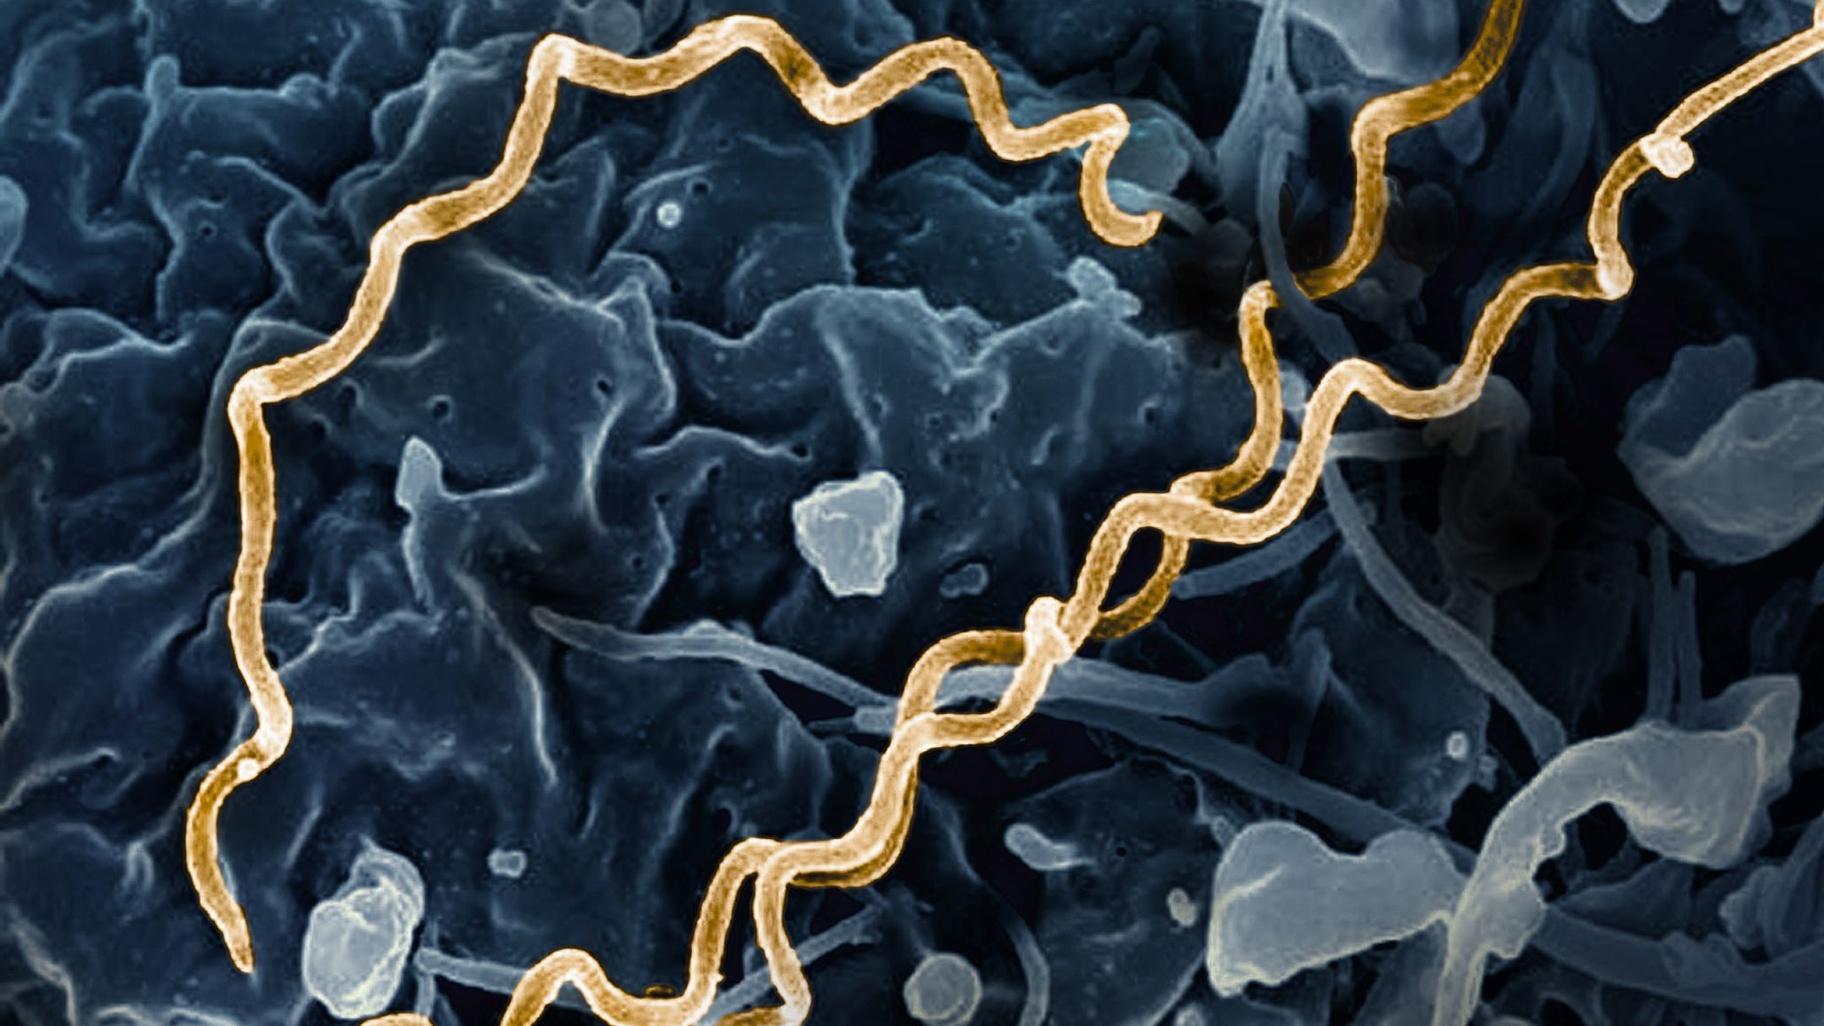 Syphilis is caused by the bacteria Treponema pallidum. Cases have been increasing in the United States. (NIAID via CNN Newsource)